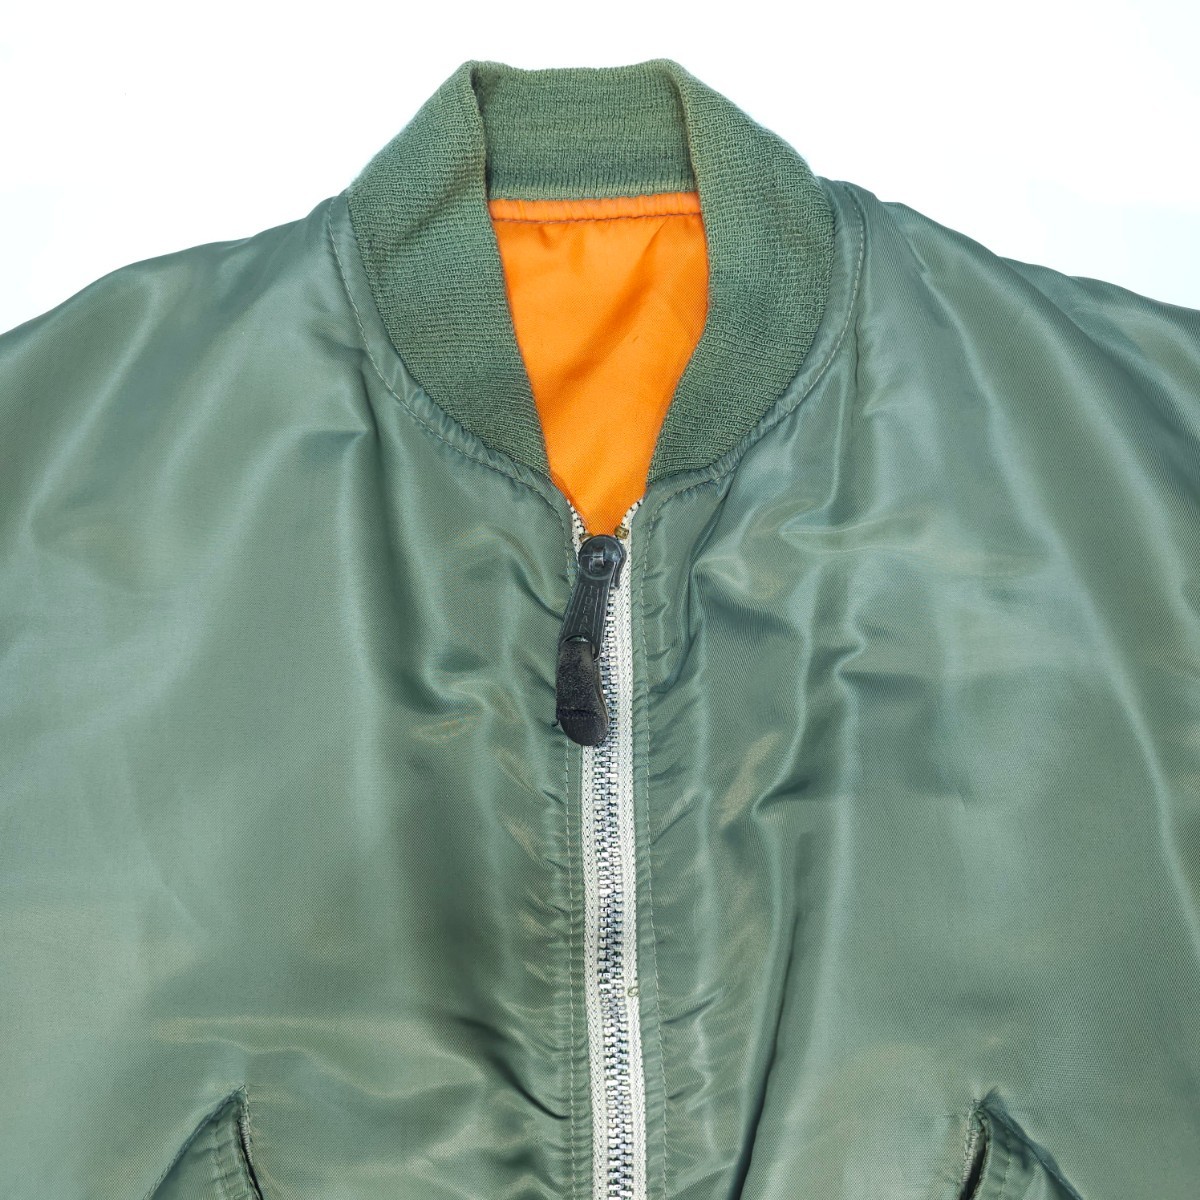 USA made AVIREX Avirex company manufactured MA-1 flight jacket S America made military jacket American made Vintage MA1 army thing jacket green green 